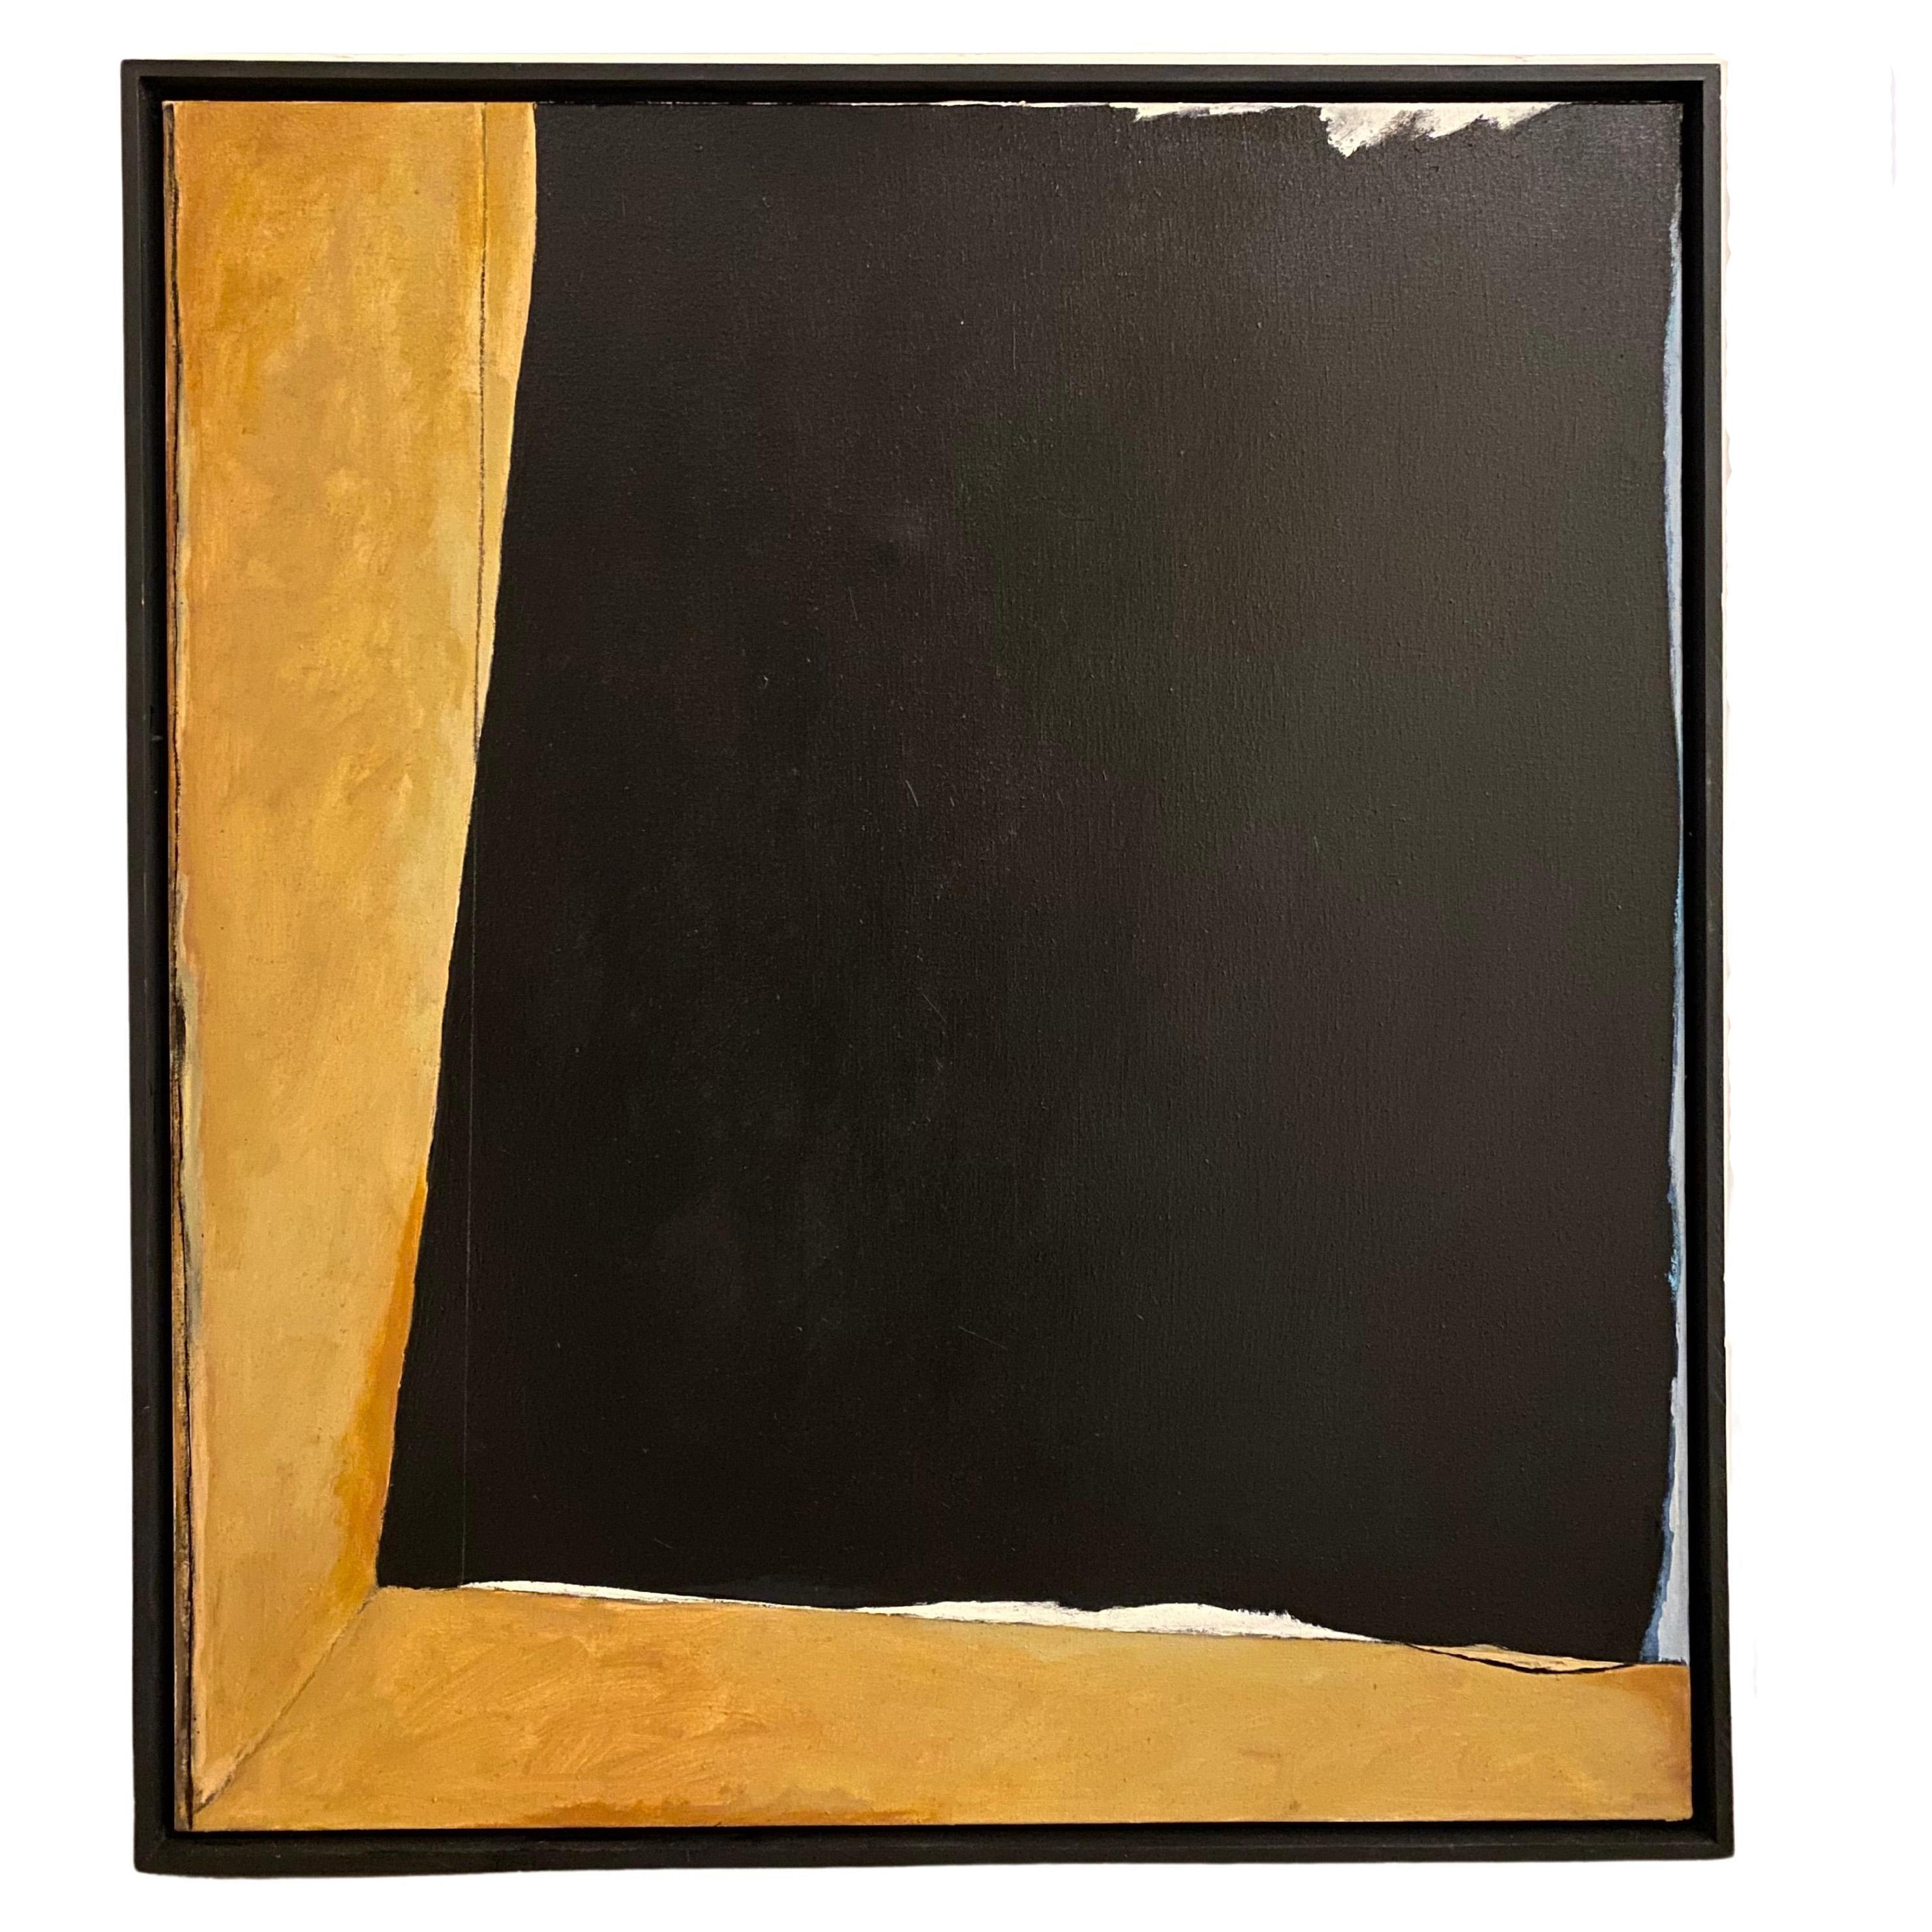 This large abstract oil artwork features a large black block sitting on a yellow L on the left corner of the frame. The compartmentalized color fields offered viewers a powerful and bold overall impression. The painting is signed and dated (1994) at